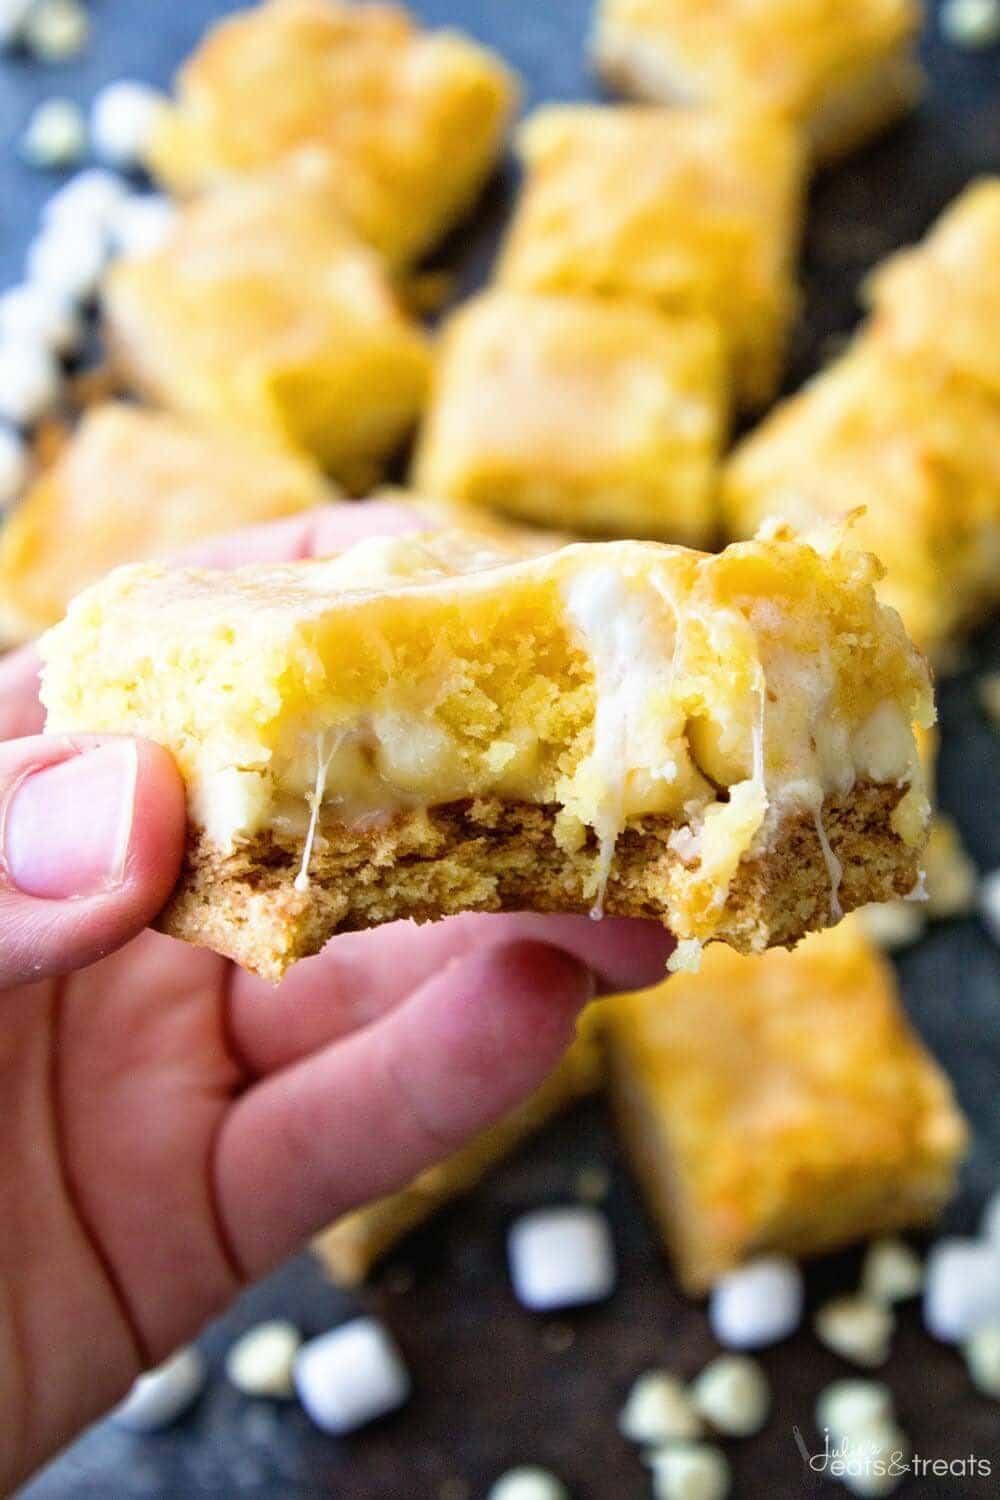 White Chocolate S’mores Bars ~ The Ultimate Treat! These Gooey Cake Bars are a Delicious Twist on a S'mores Bar!